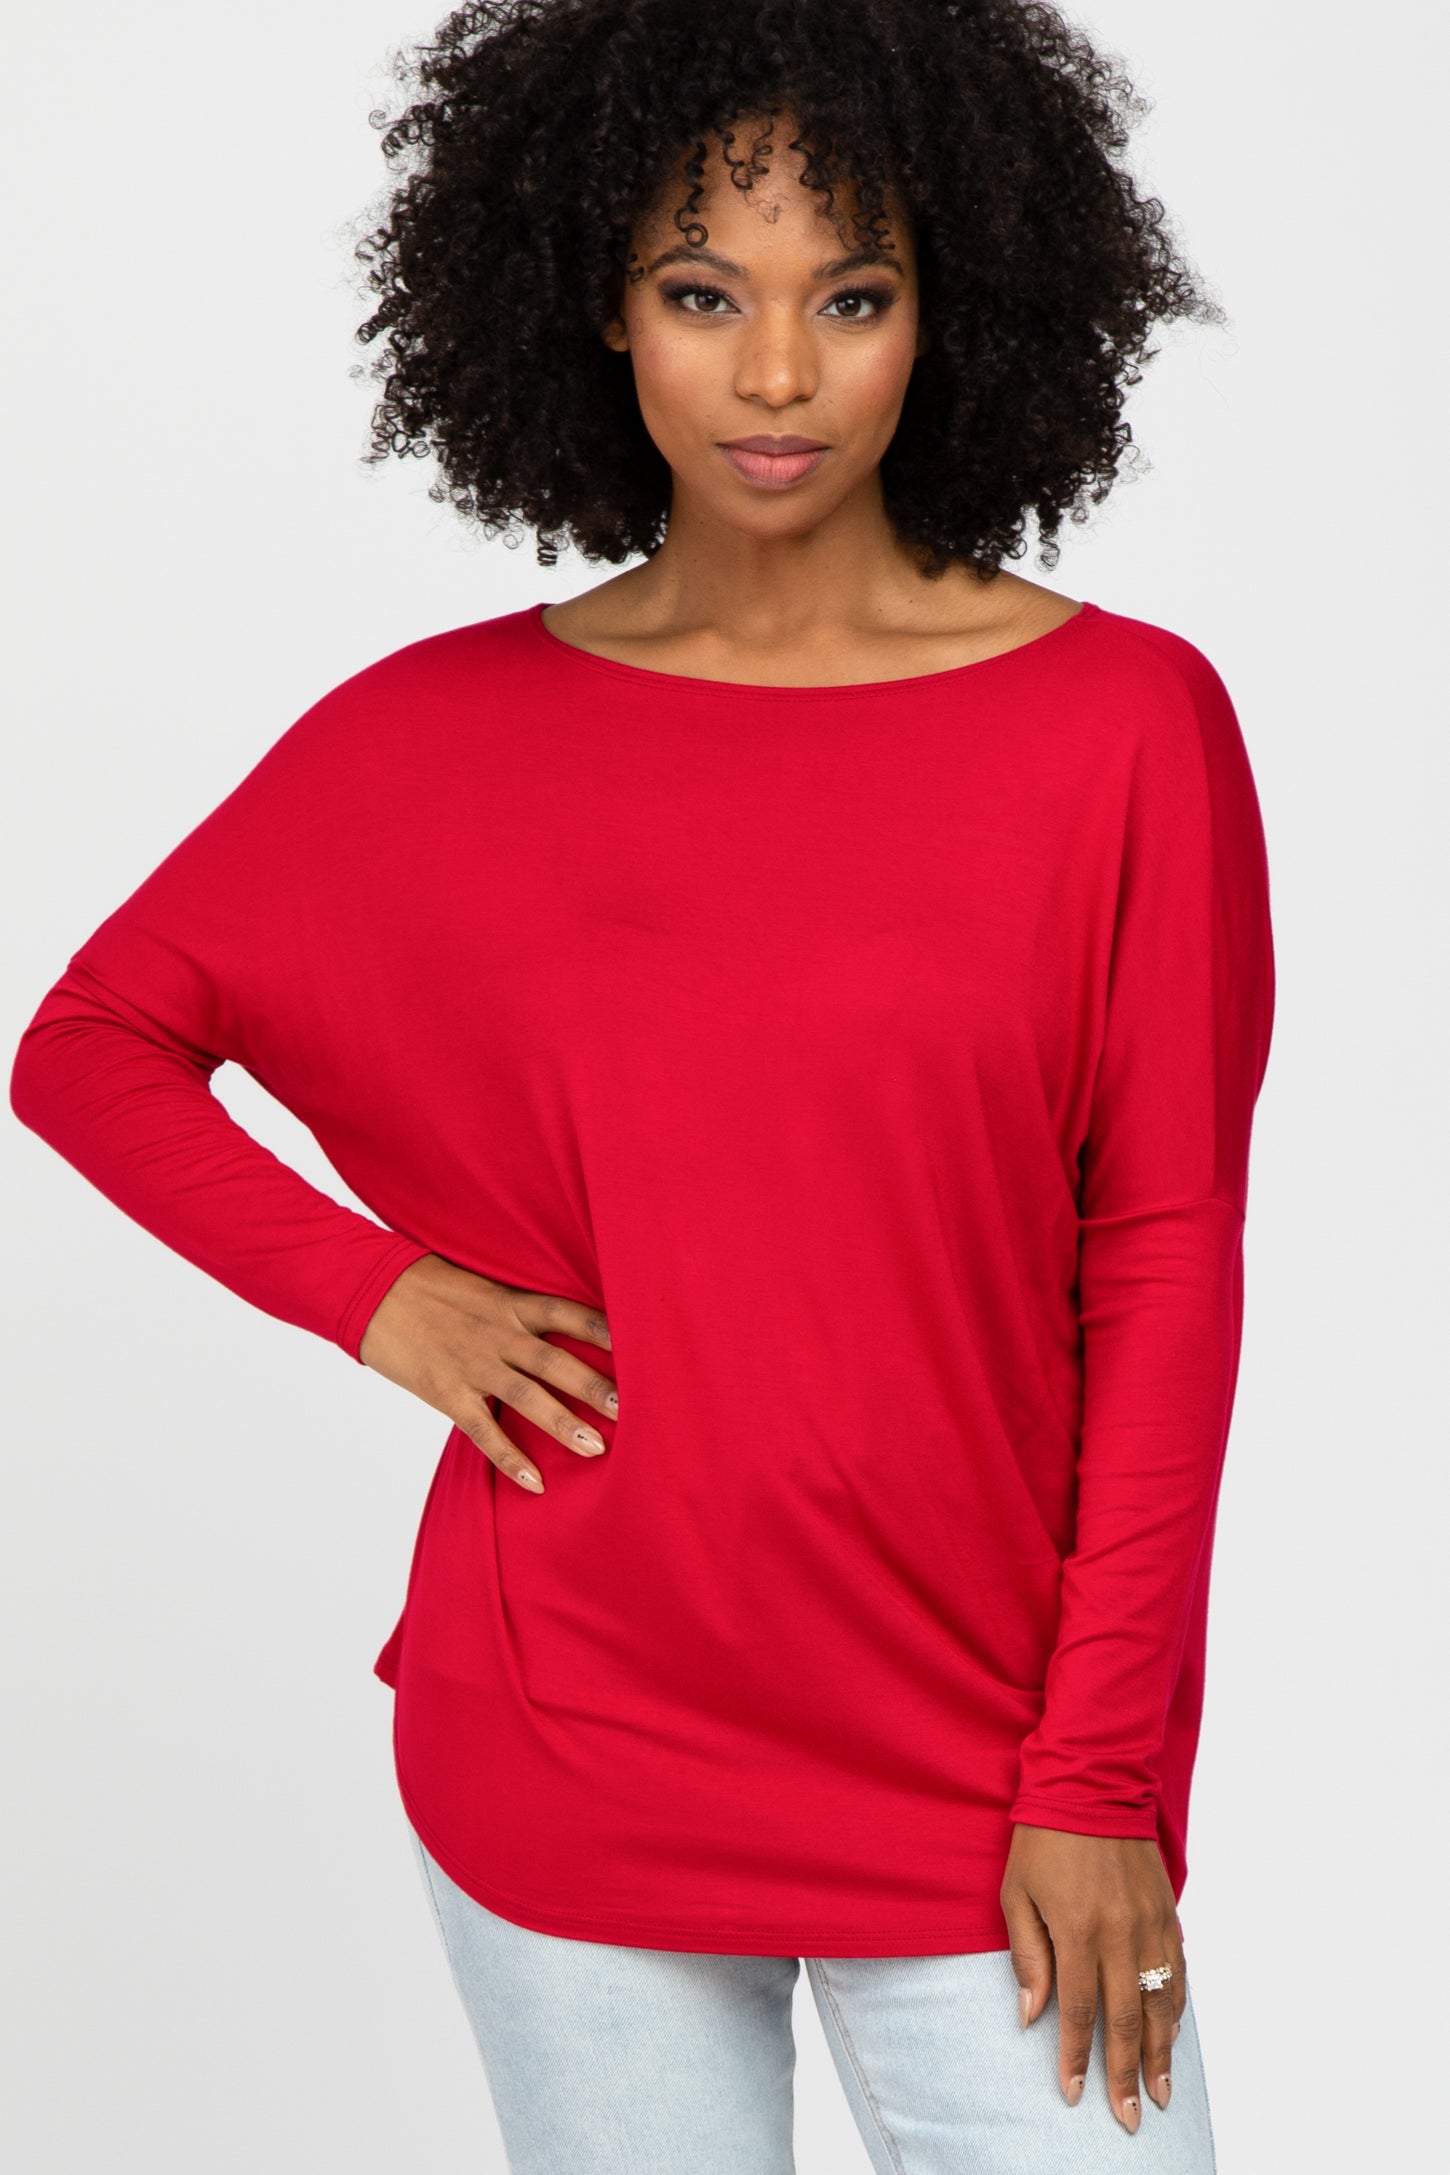 Red Dolman Sleeve Maternity Tunic Top